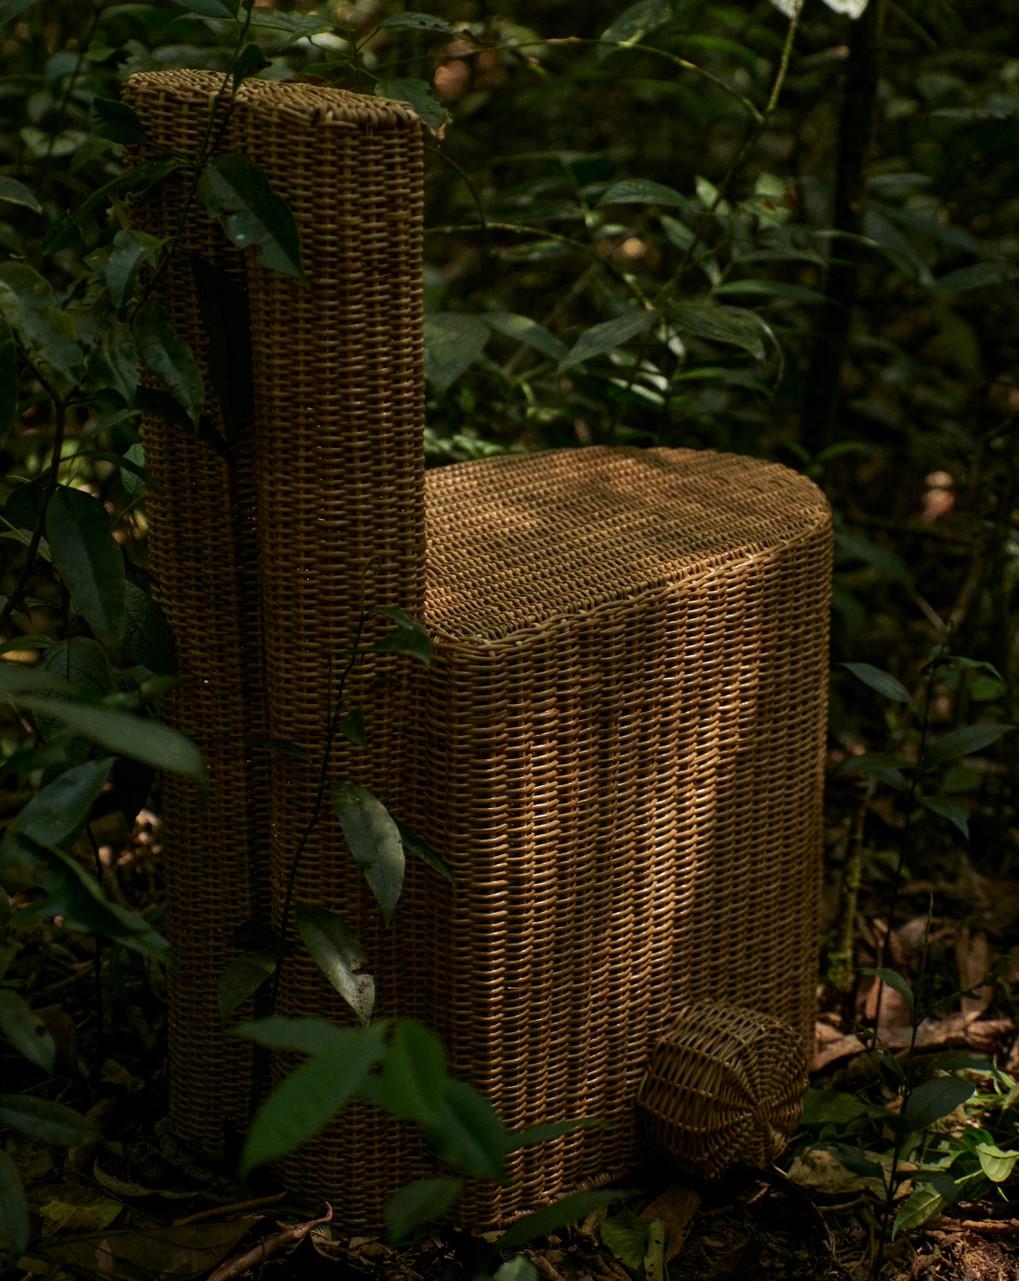 Manufactured by Fango.
Colombia, 2023
Yaré fiber and metal structure.

Measurements
46 x 56 x 90h cm
18,1 x 22 x 35,4h in

Provenance
Fango Studio, Medellín, Colombia.

Exhibitions
Casavells 2023.

Concept
The Ibuju collection